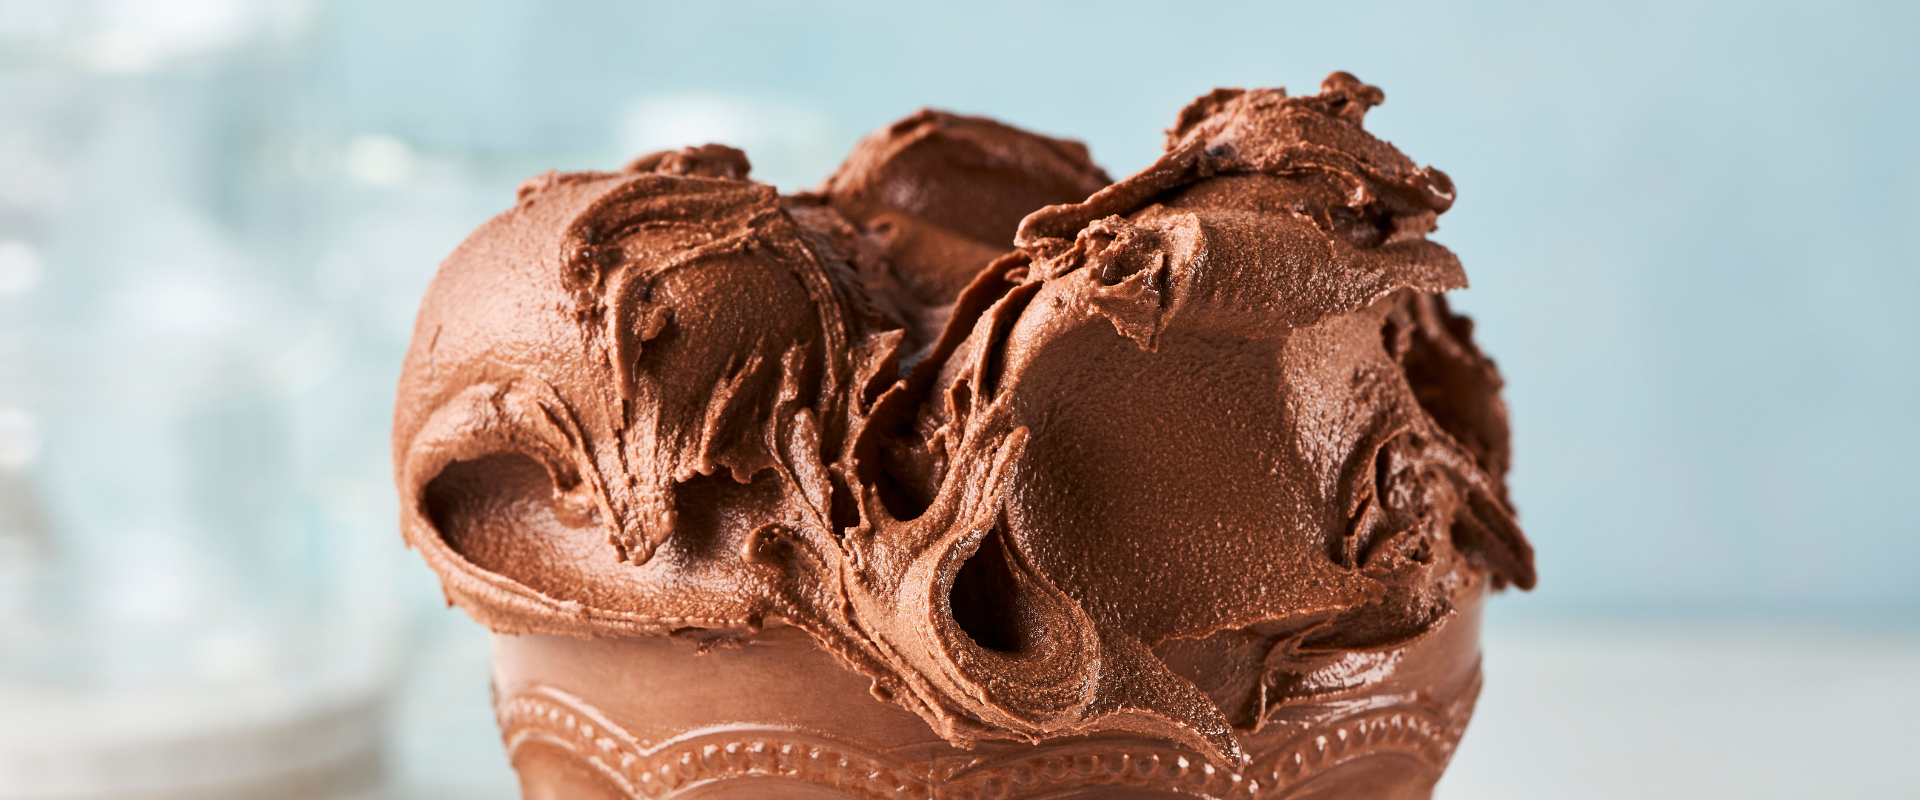 Fabbri Simplé: the good artisanal gelato in only 10 minutes: discover the range of products!